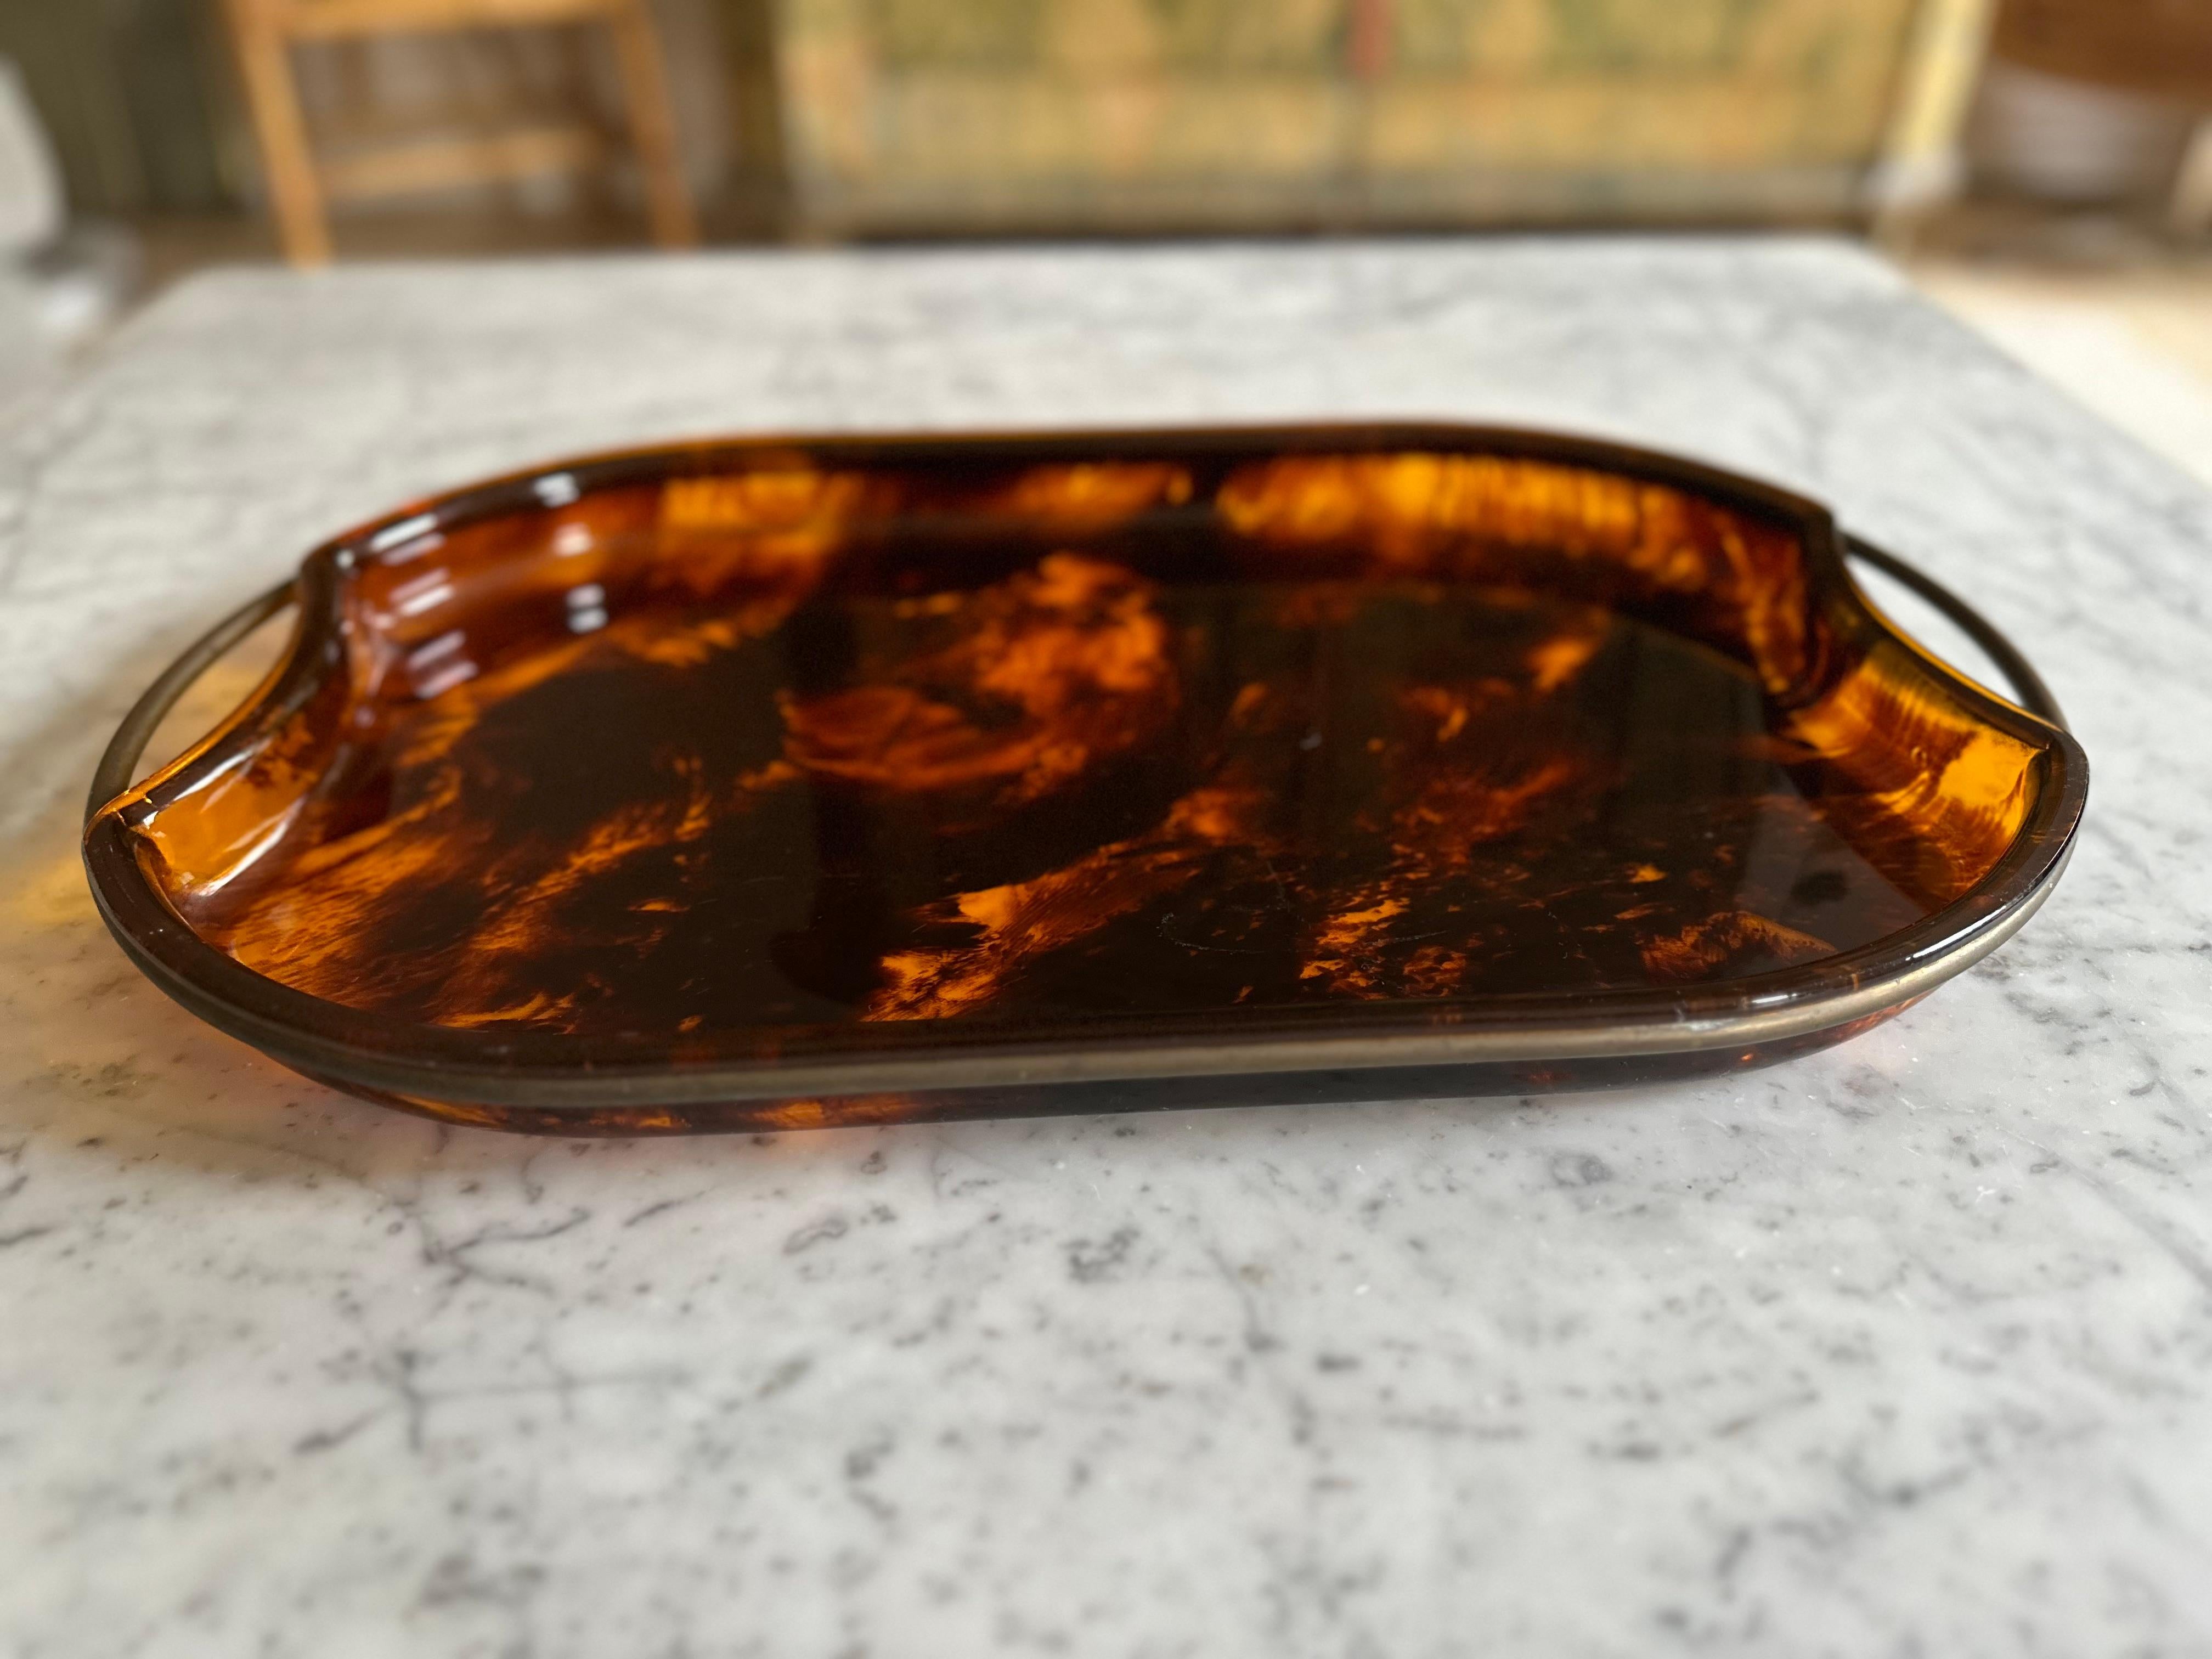  Guzzini’s Oval Lucite Serving Tray from 1970s Italy – Faux Tortoiseshell -brass For Sale 8